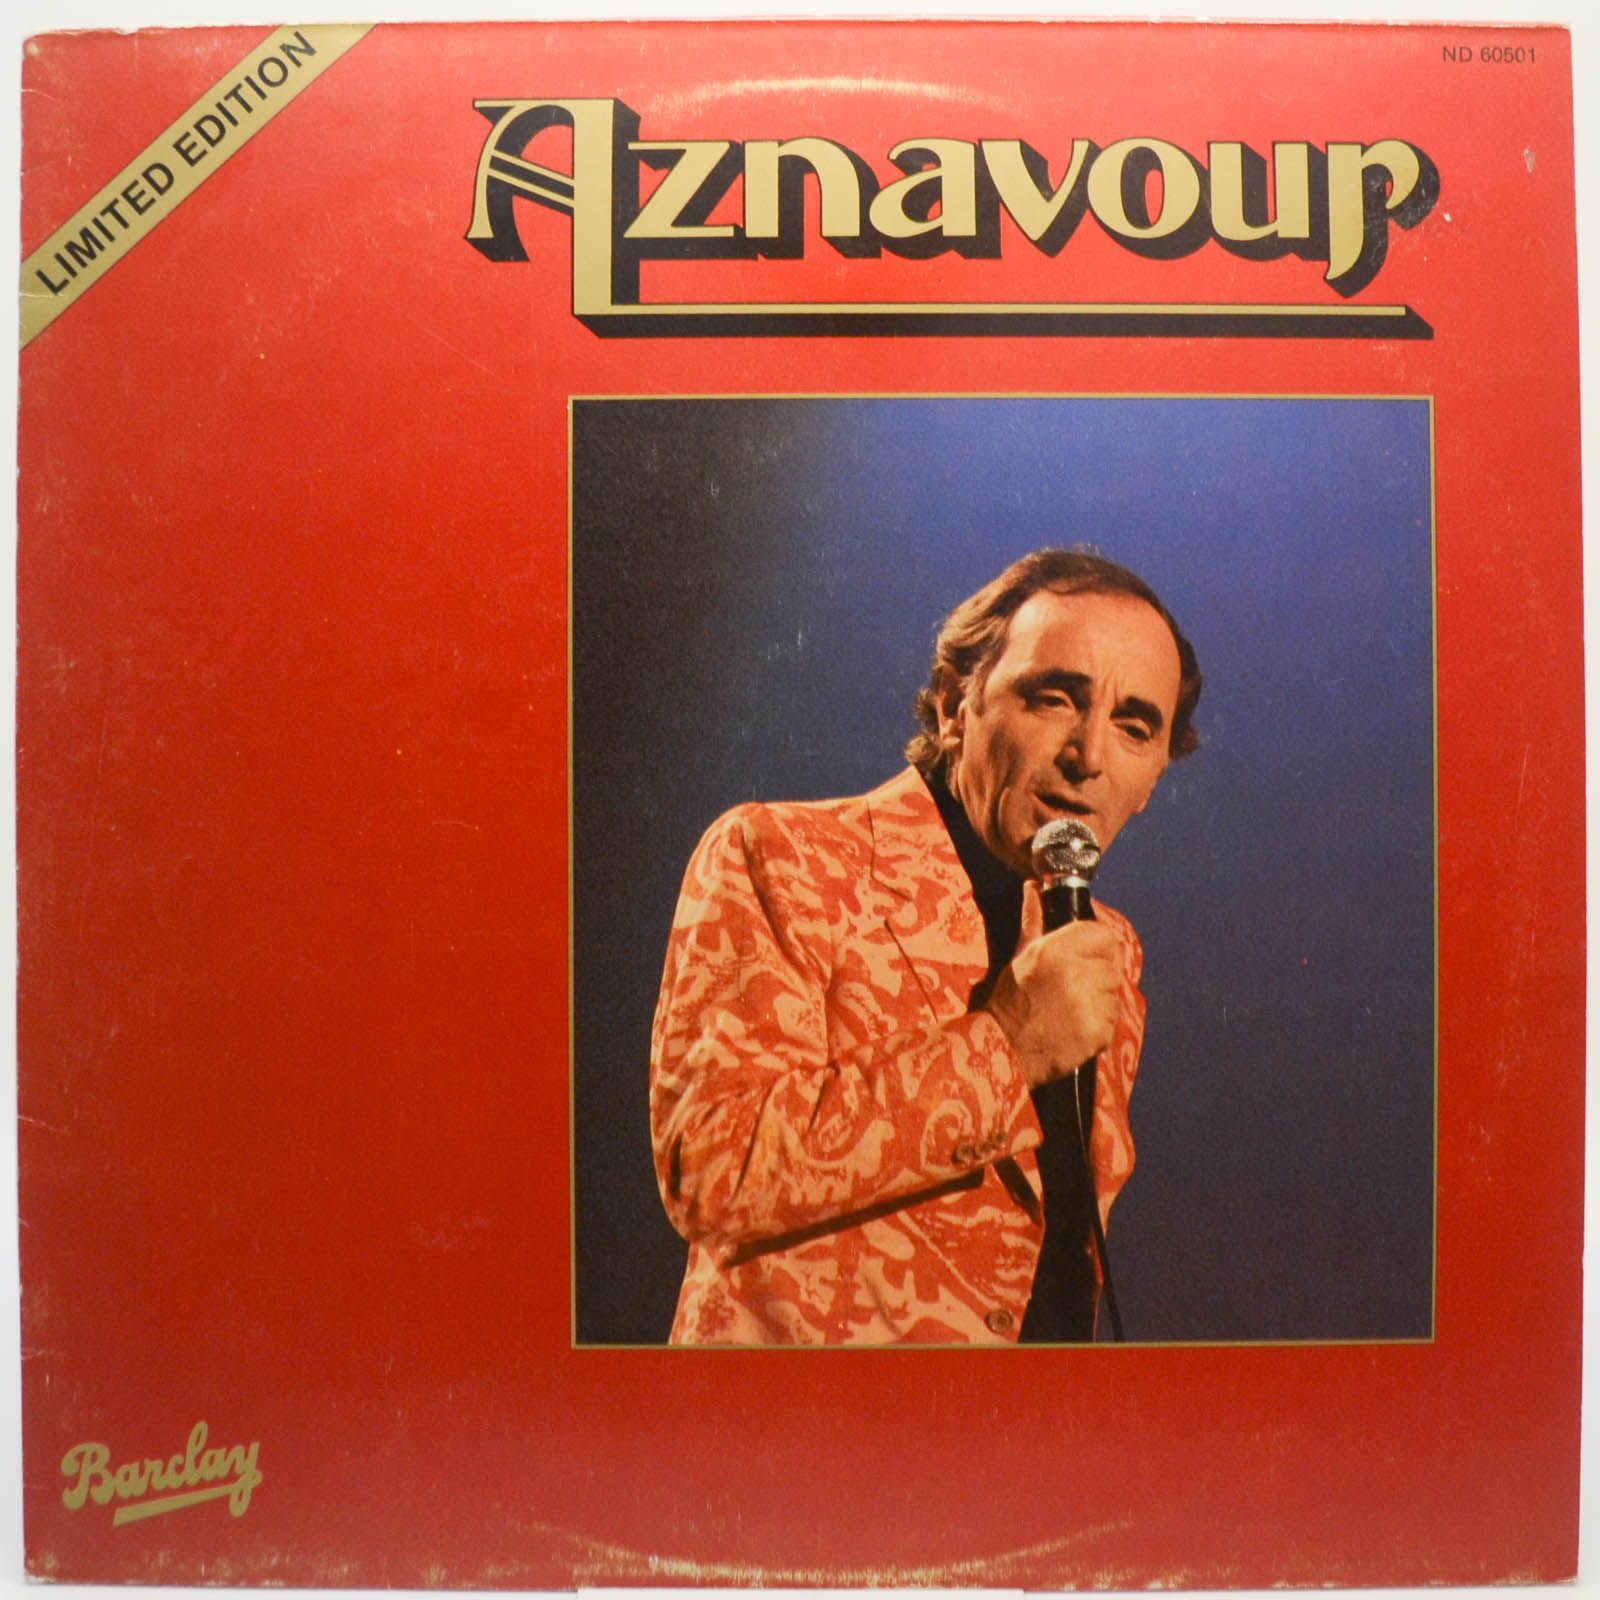 Charles Aznavour — For Me... Formidable, 1980